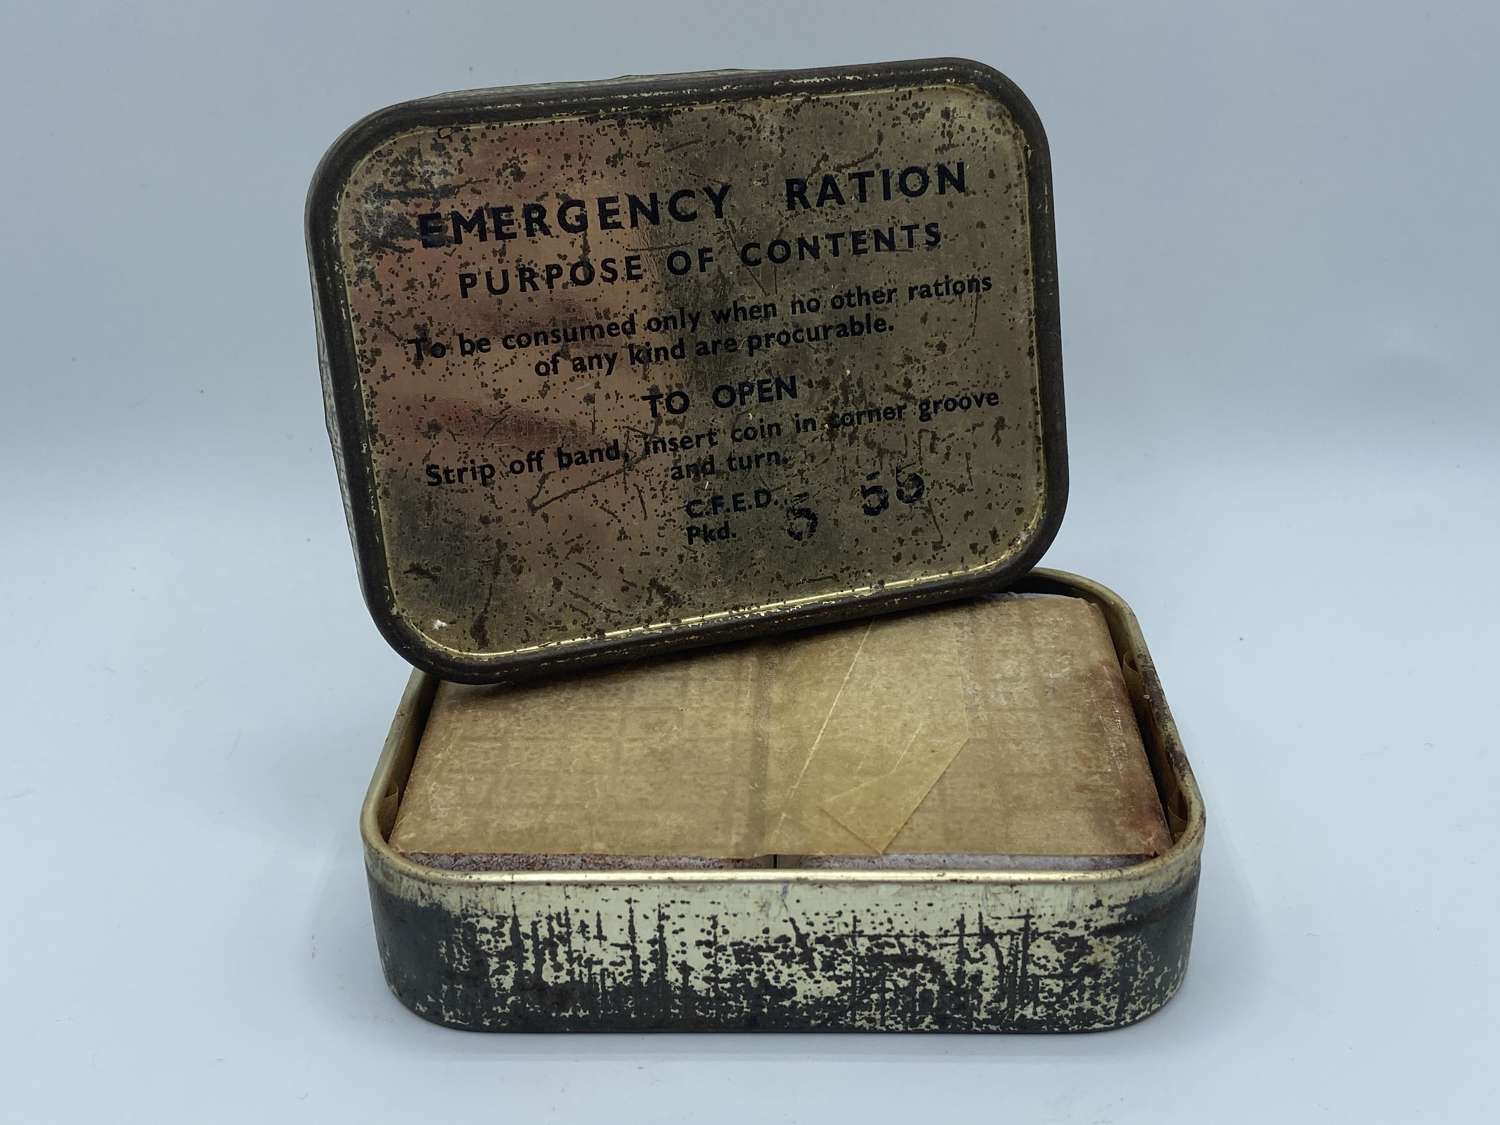 1955 Dated British Army Emergency Ration & Contents Cyprus Emergency